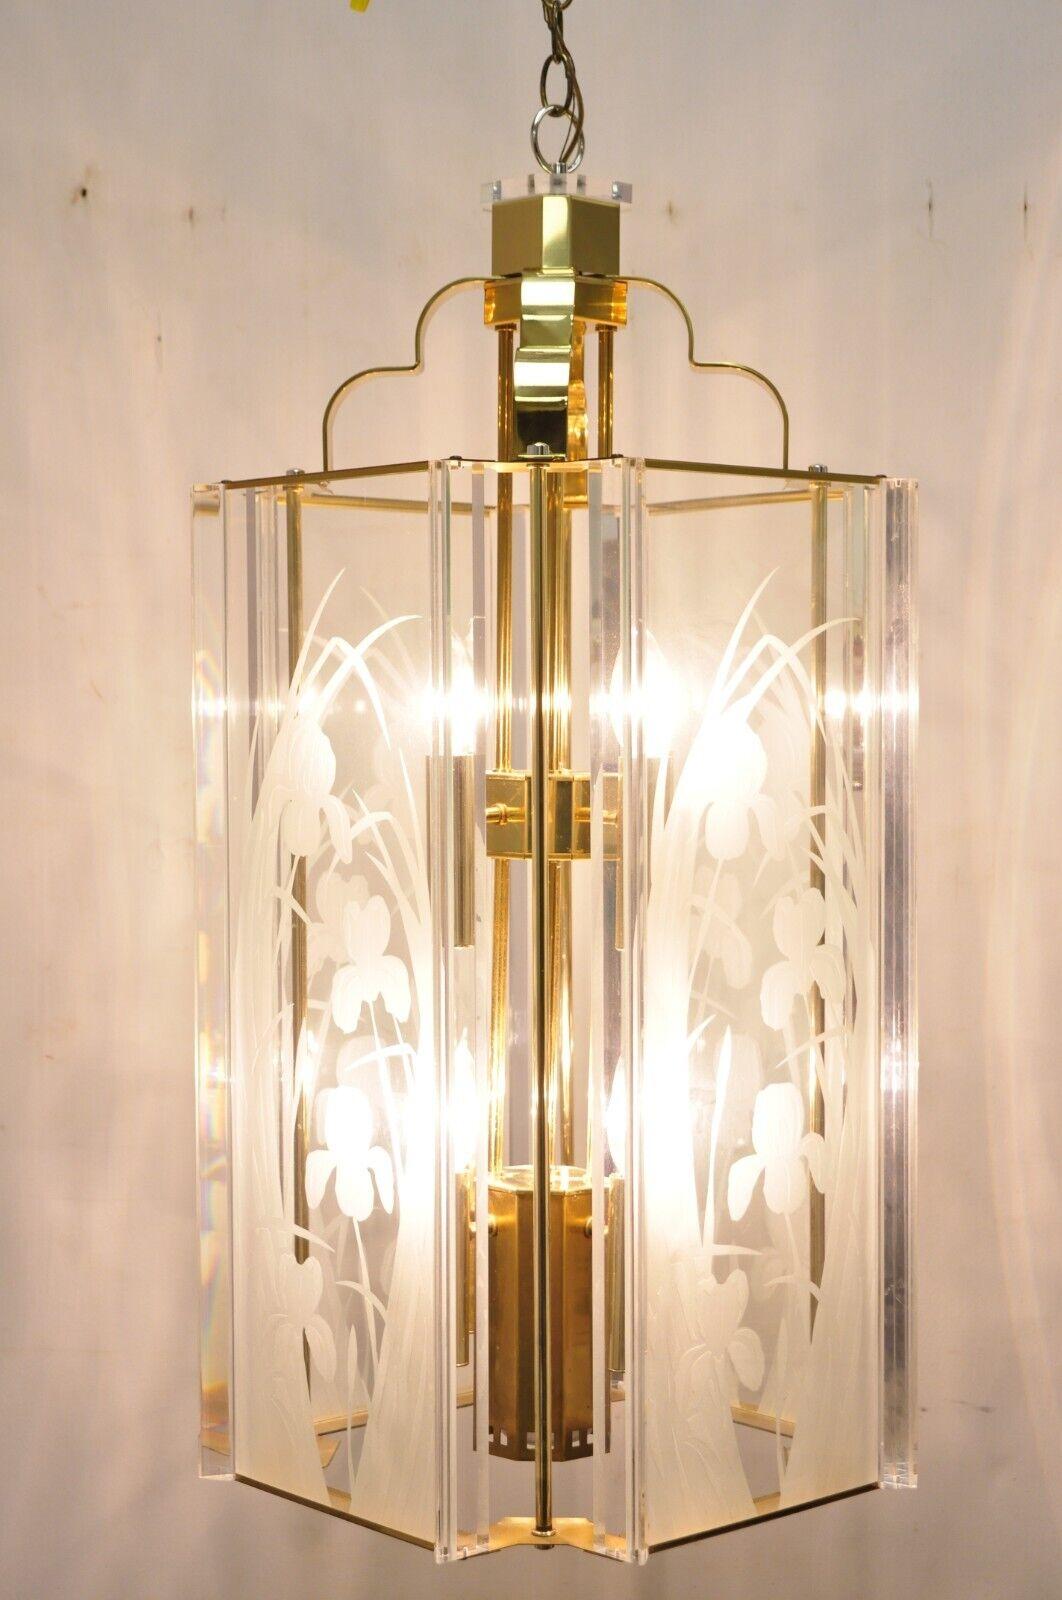 Vintage Fredrick Ramond brass lucite glass pendant light chandelier. Item features (9) lights, etched glass panels, Lucite accents, brass frame, original stamp, great style and form. Circa 1985. Measurements: 32